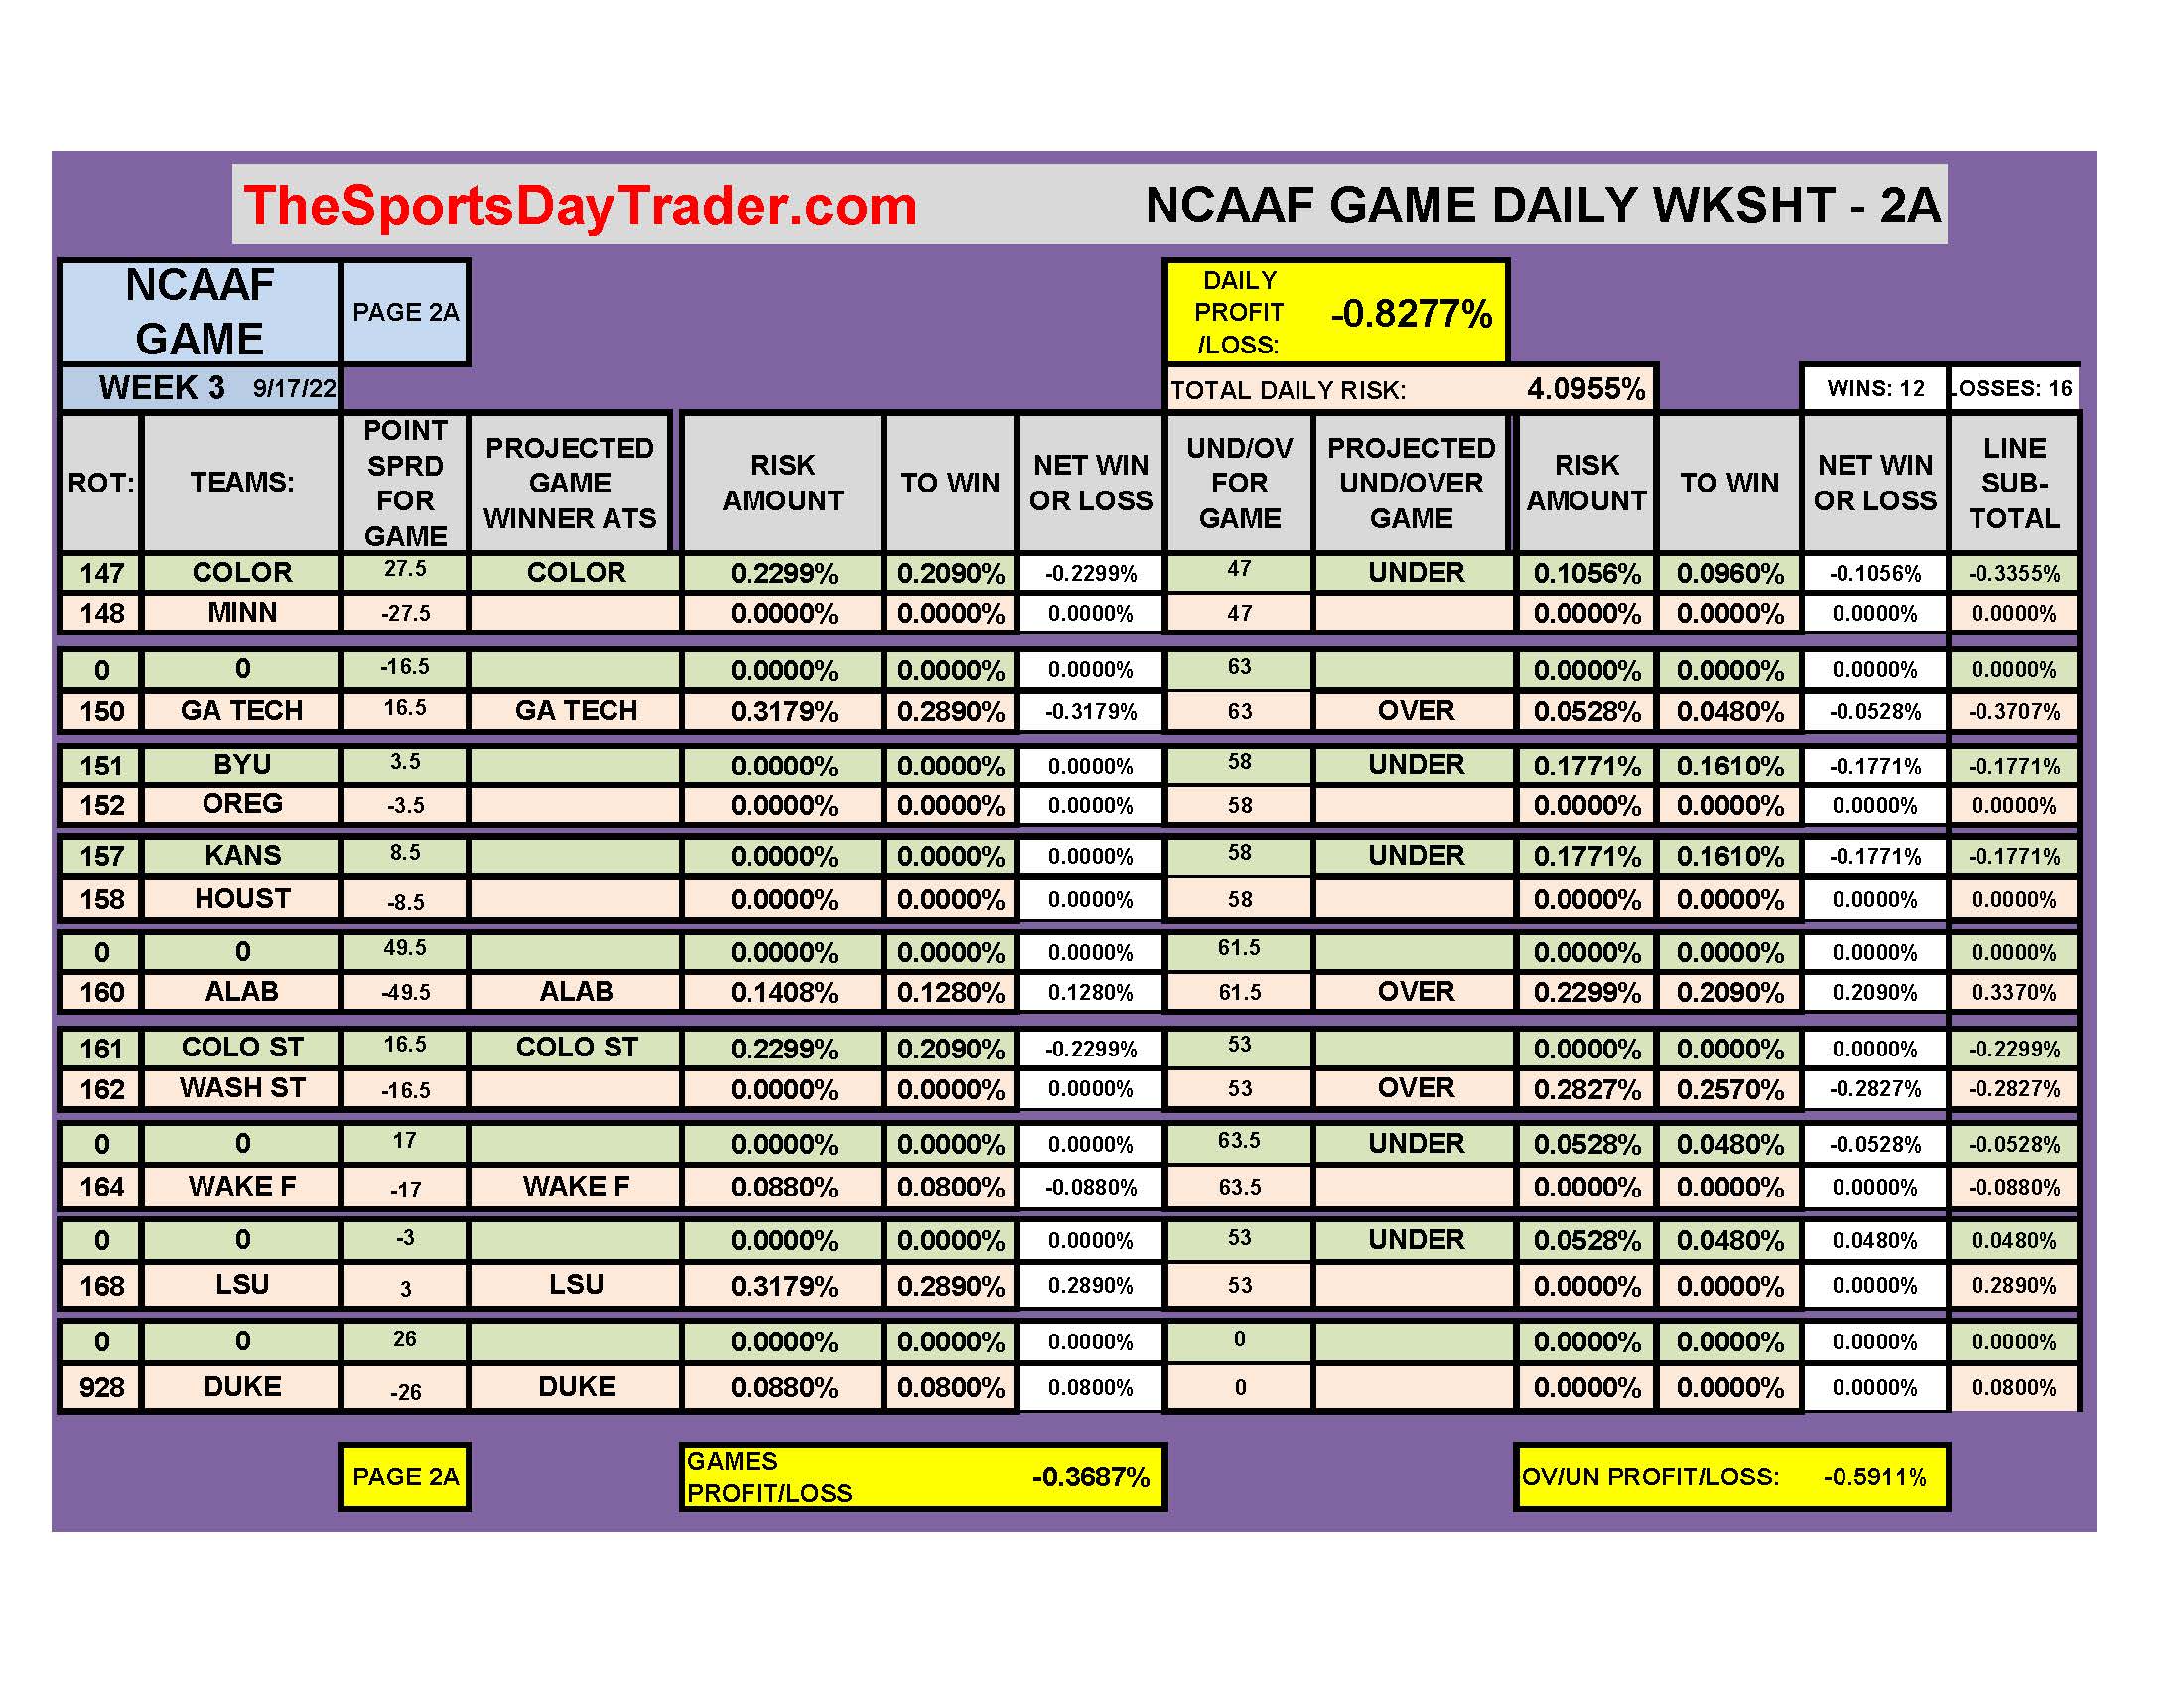 NCAAF 9/17/22 GAME DAILY RESULTS page 2A